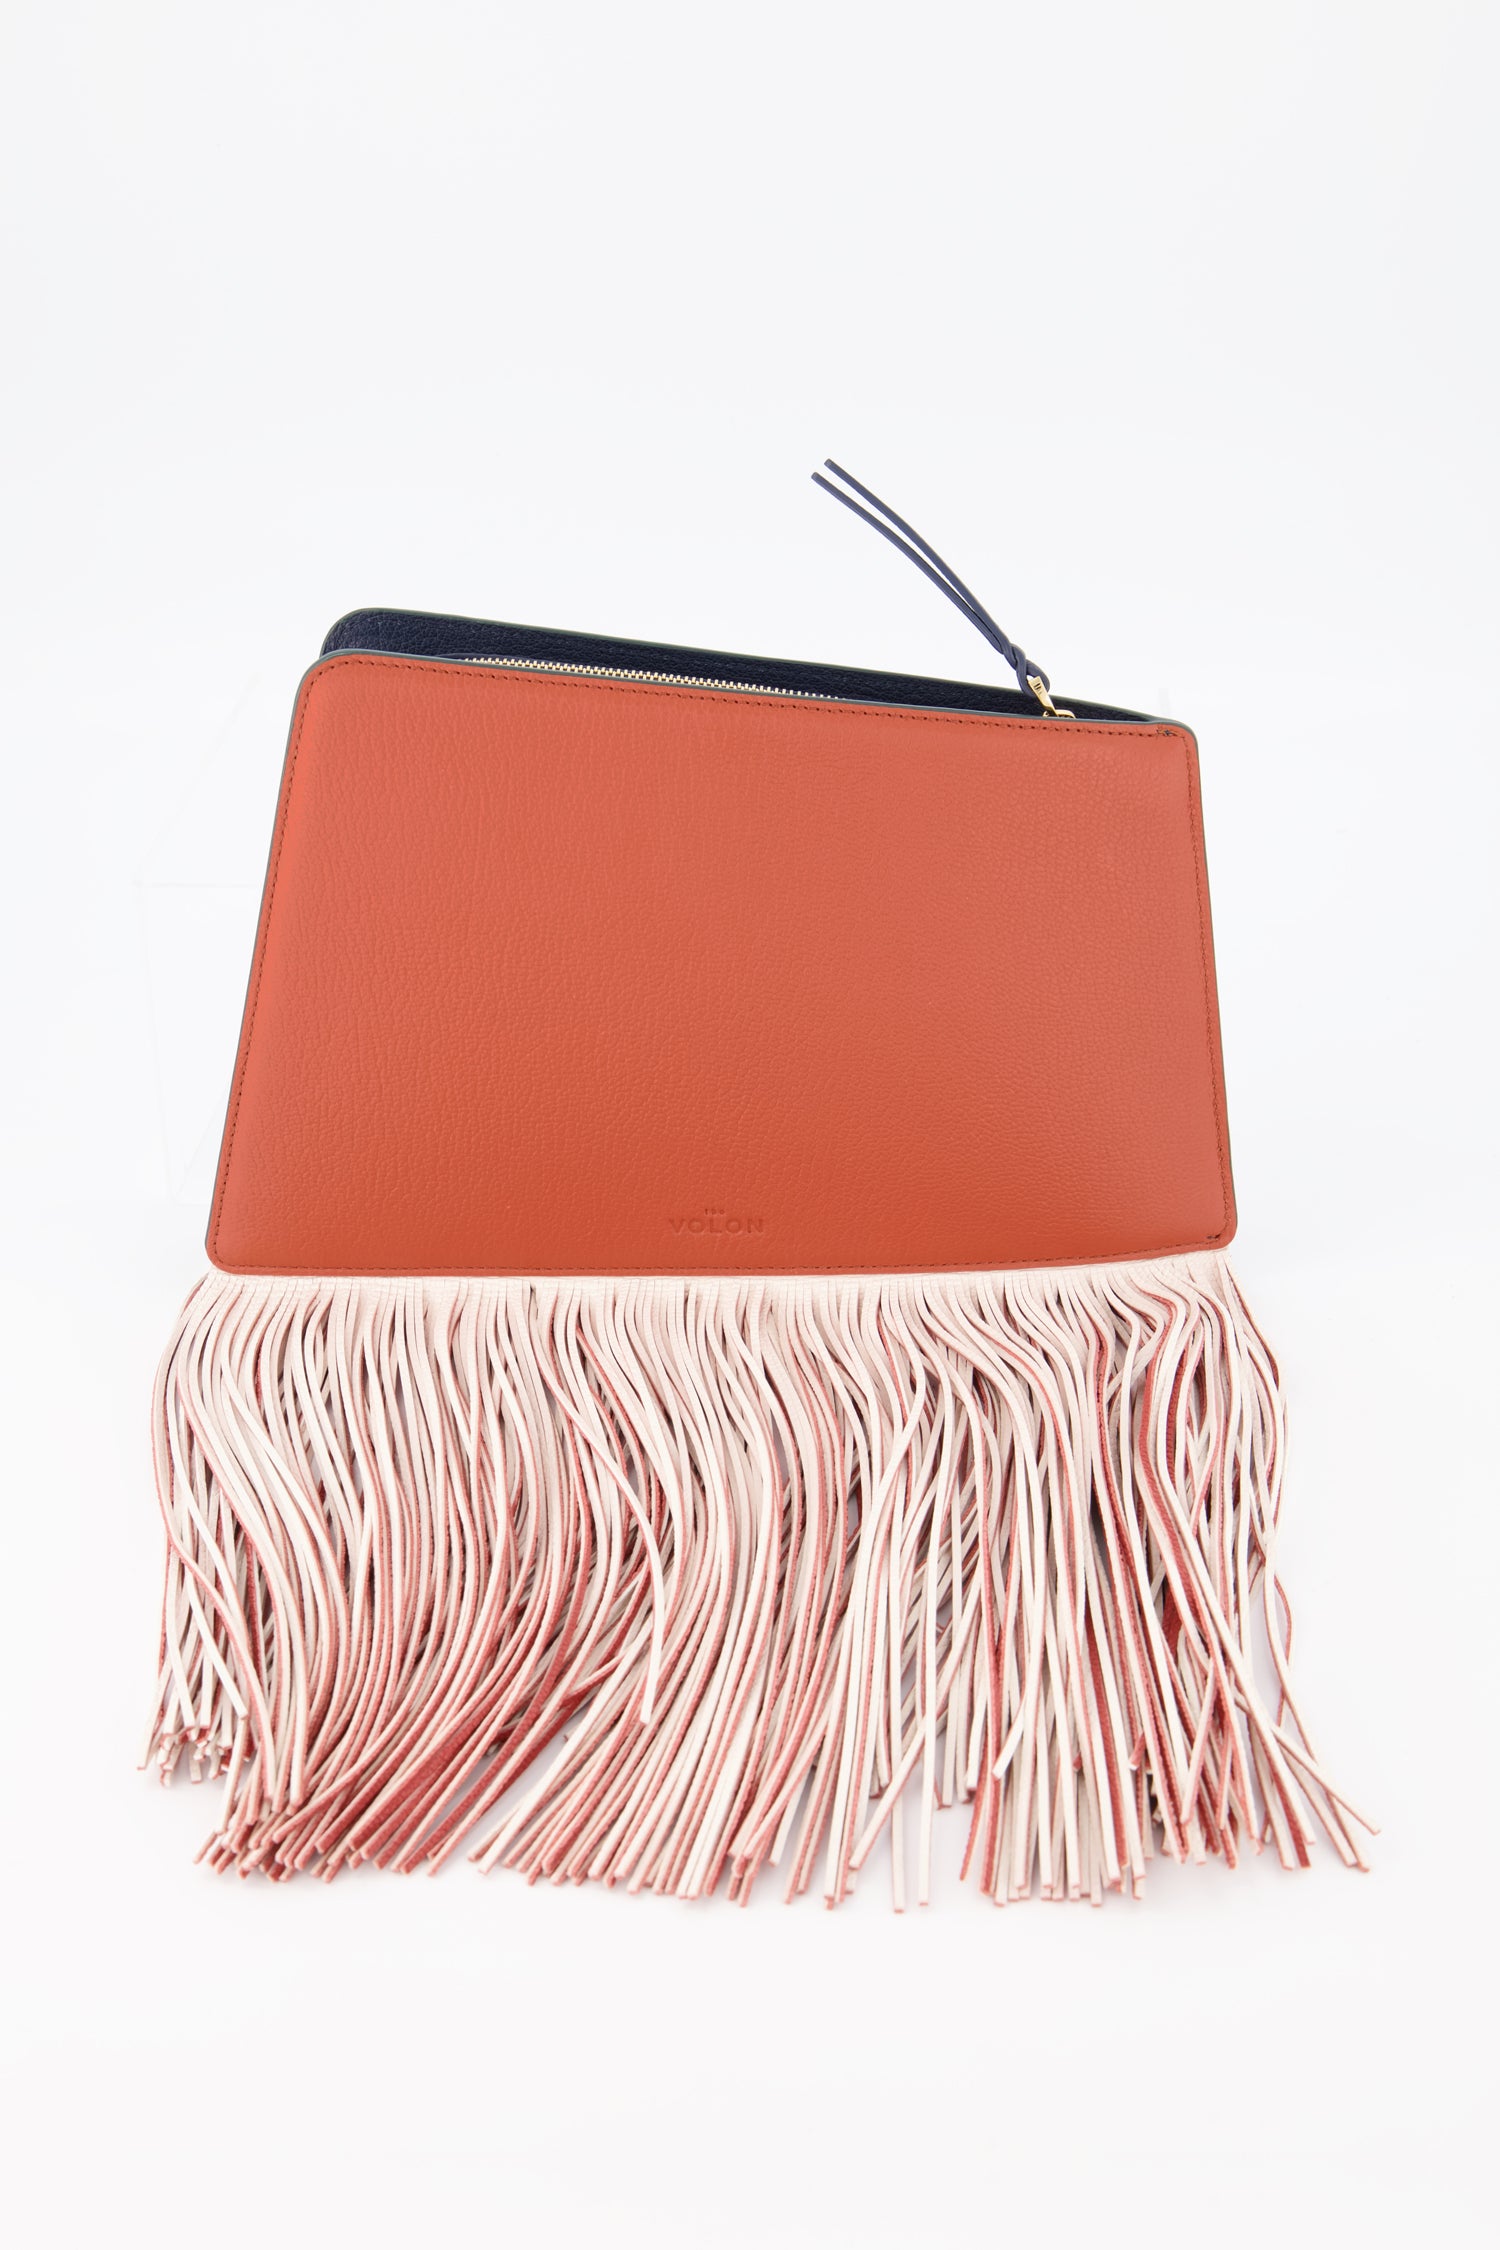 The Forest Volon Dia Clutch